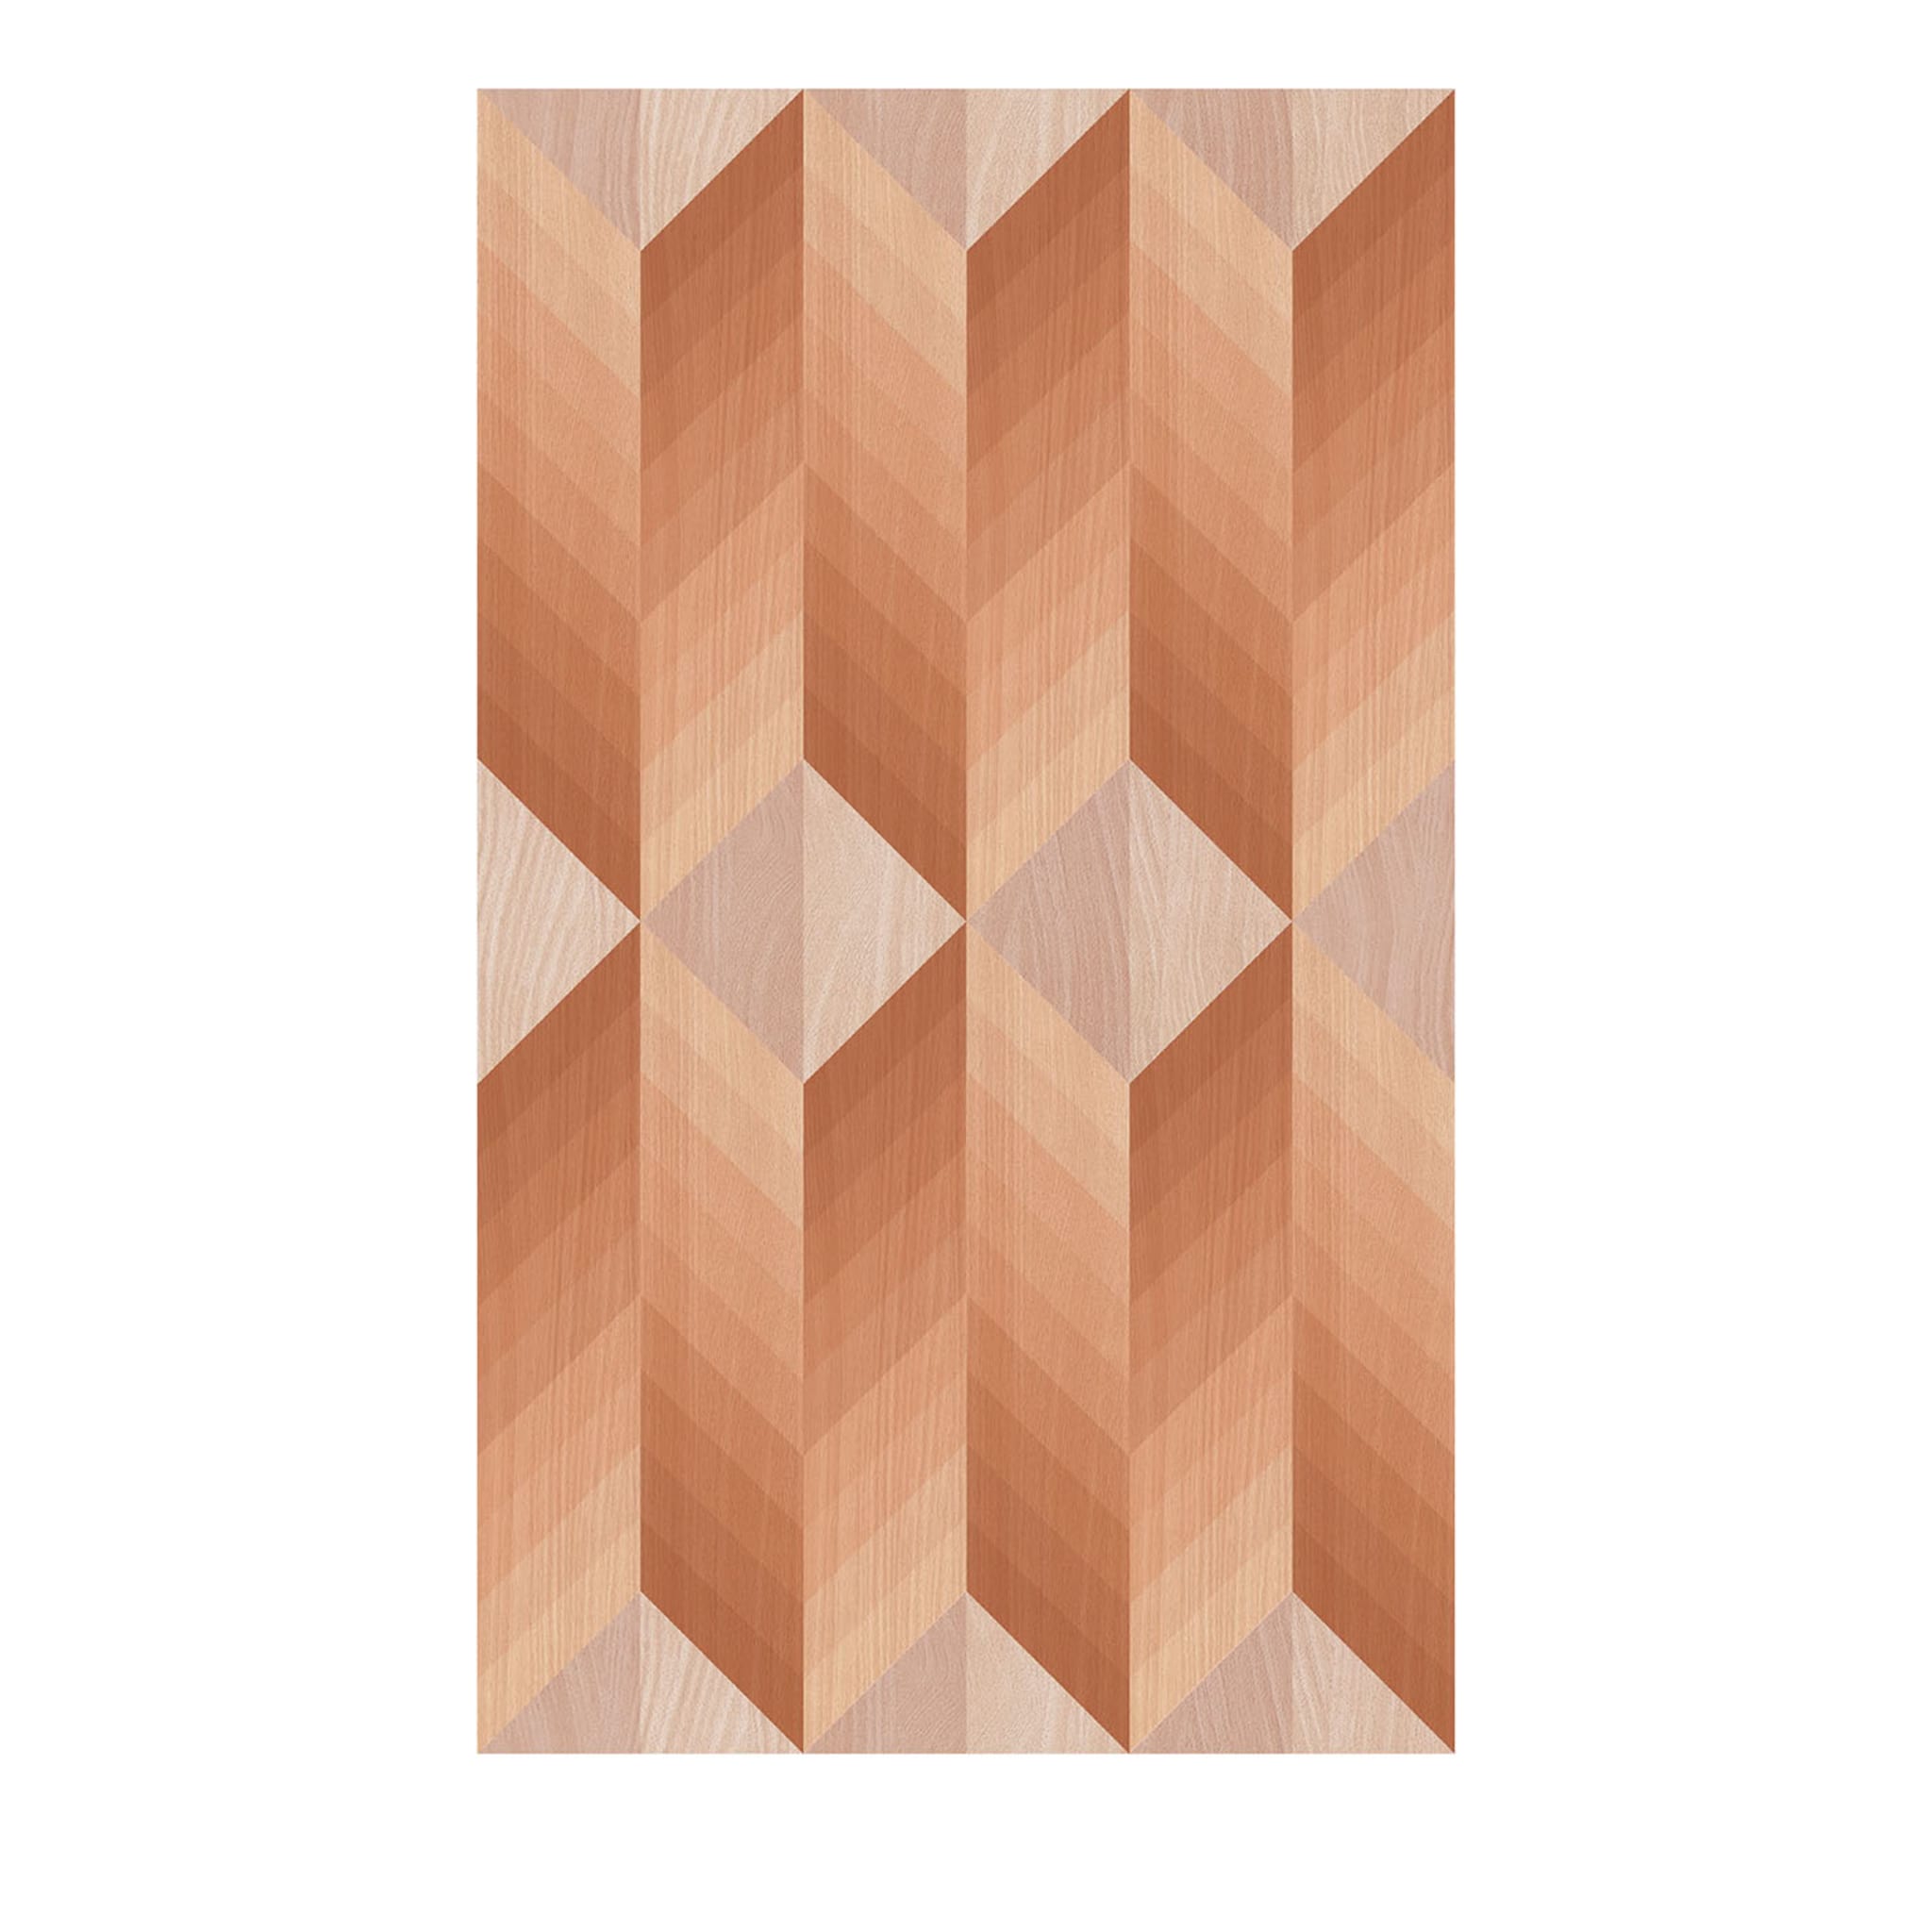 Geometry Triangles Brown Wallpaper - Main view